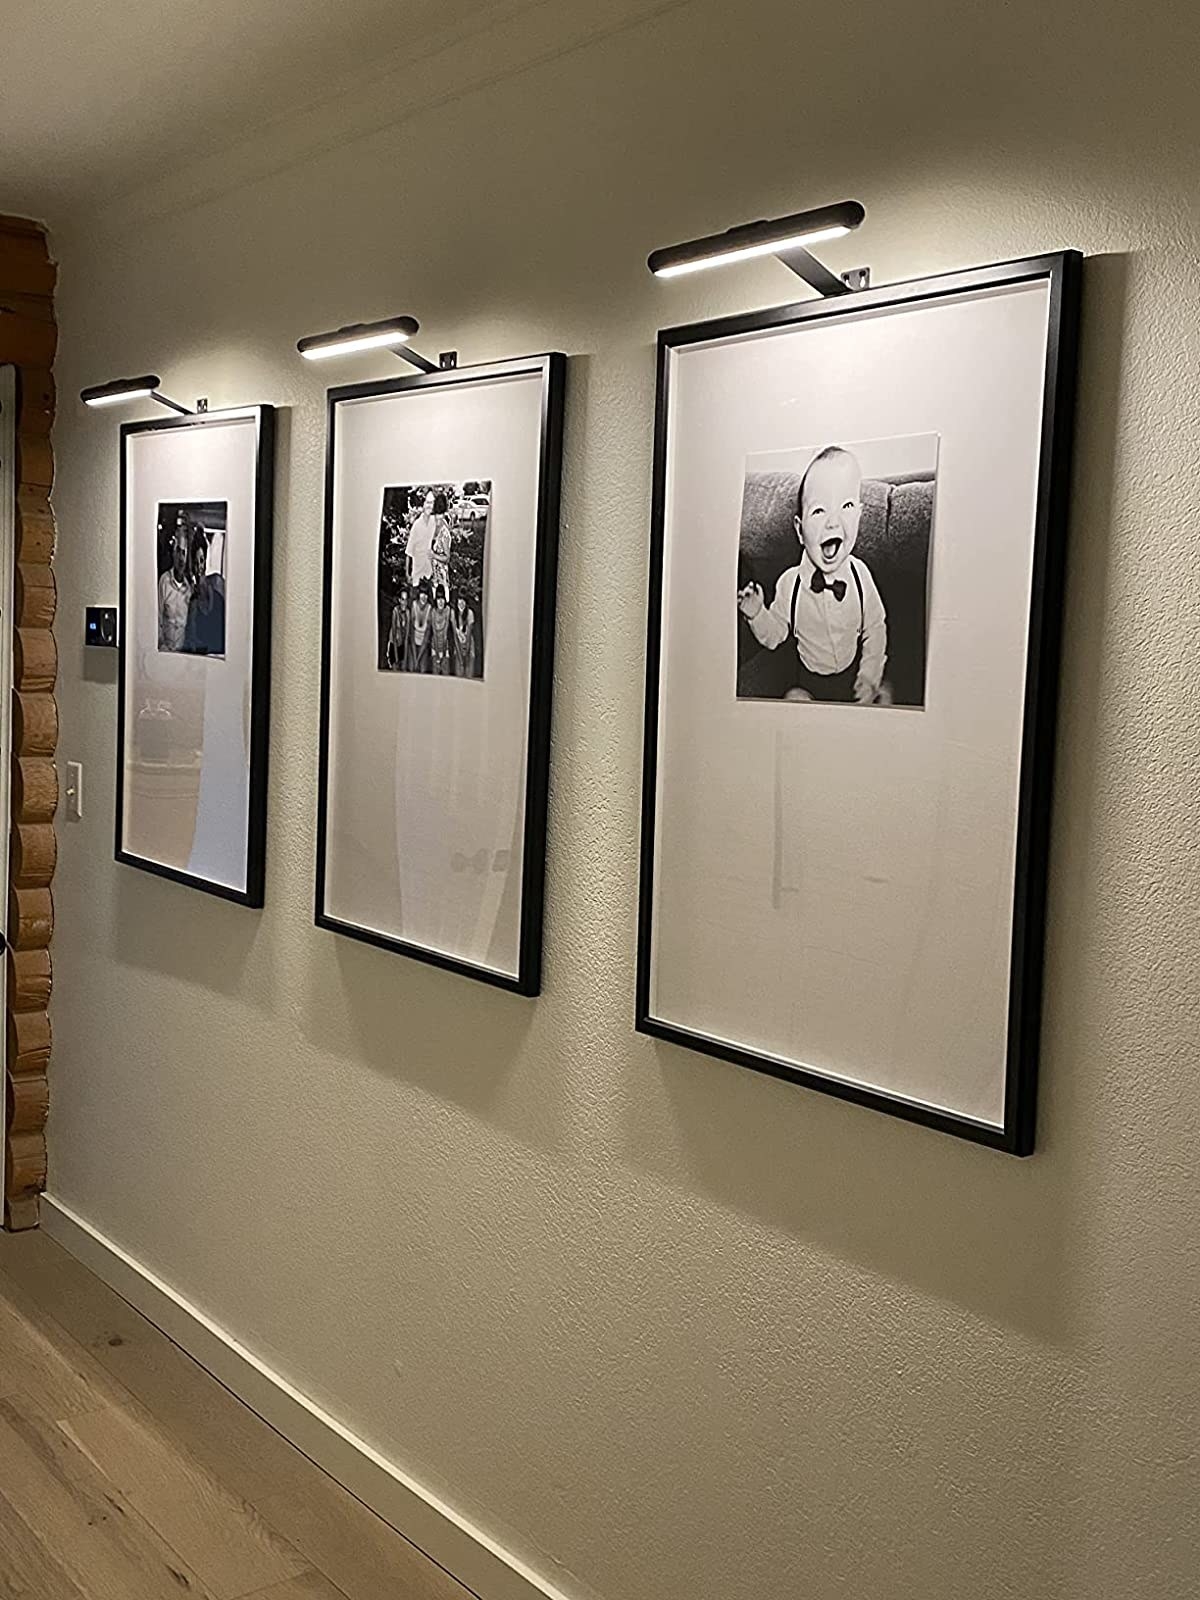 Reviewer image of picture lights above framed photos